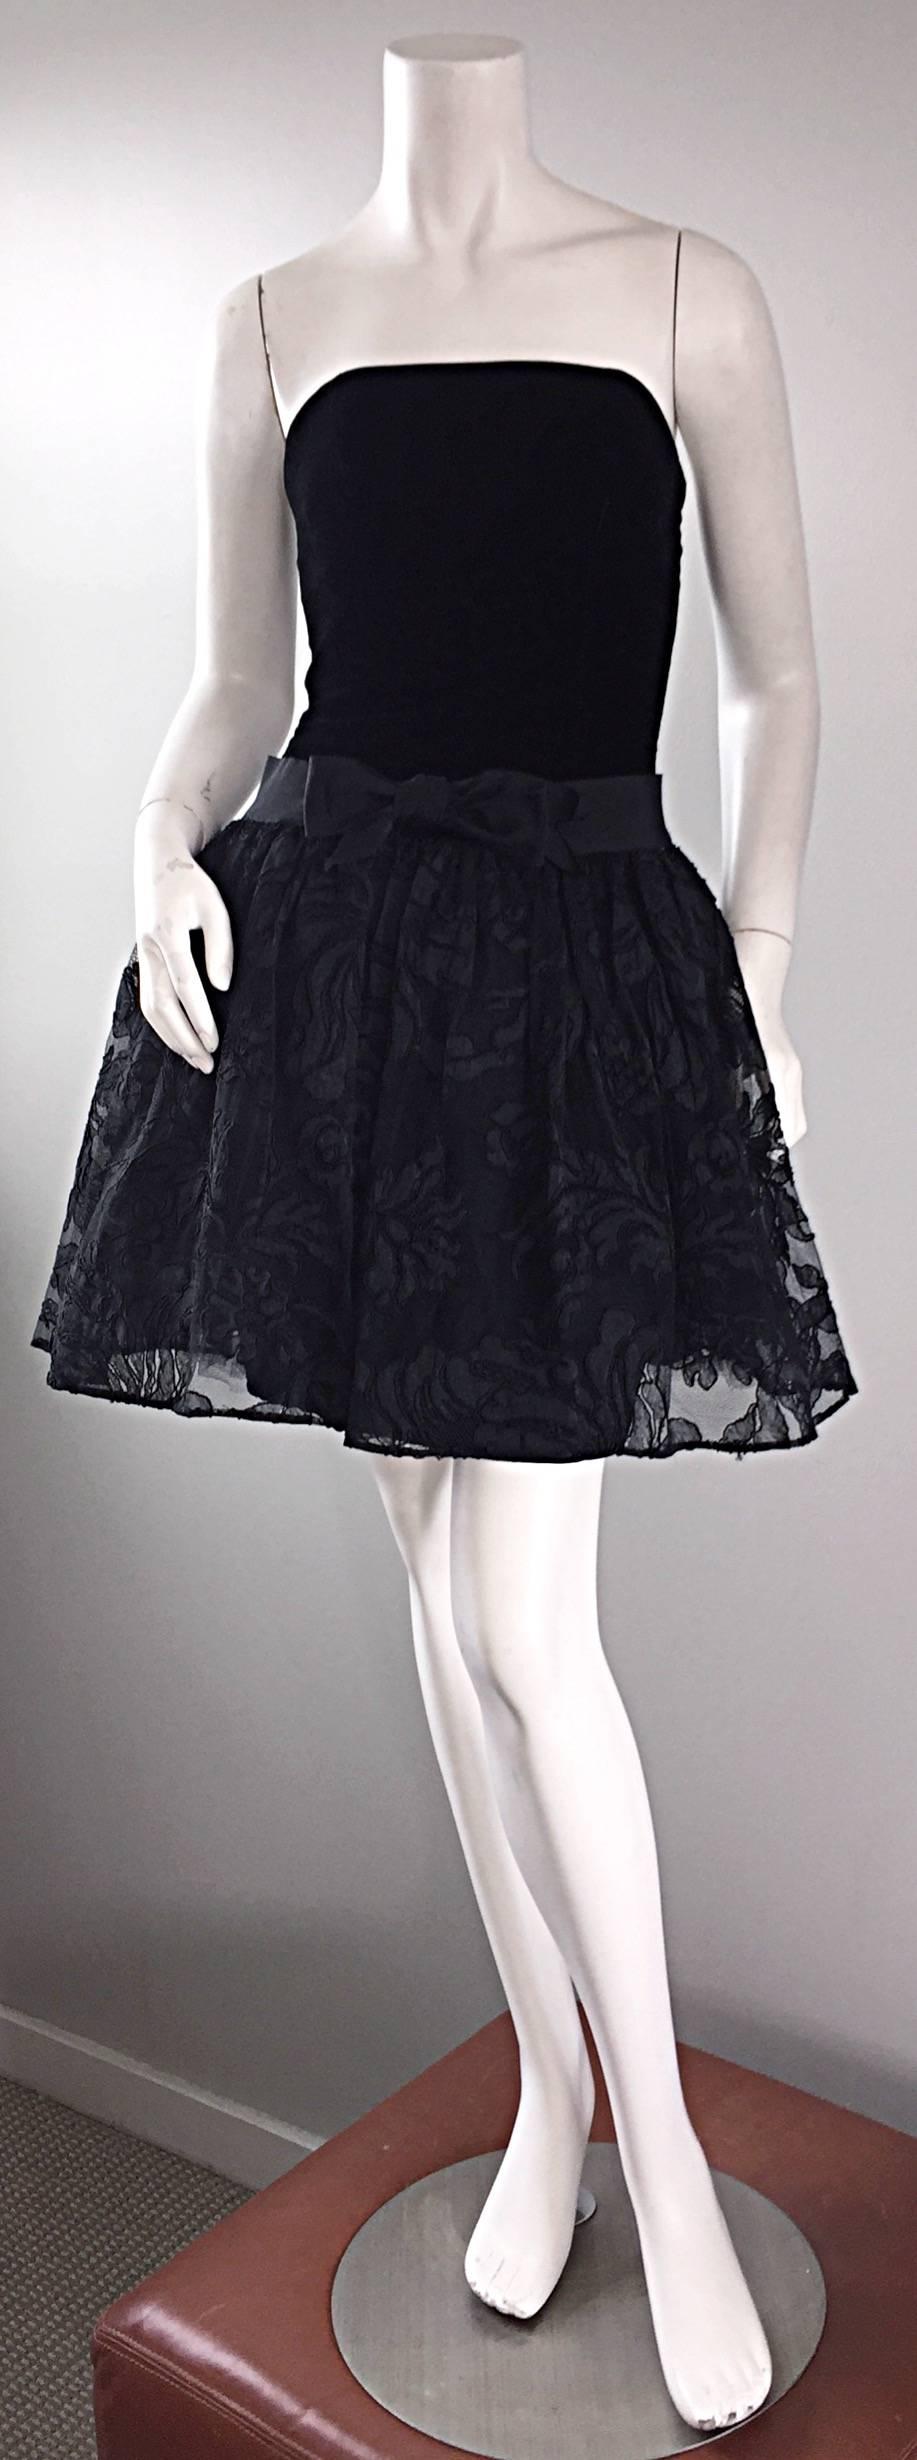 Beautiful vintage early 90s JAMES PURCELL black silk velvet and lace strapless dress! Features some of the most beautiful black French lace I have ever seen on the overskirt! Black silk velvet bodice and pencil skirt, with Purcell's signature lace